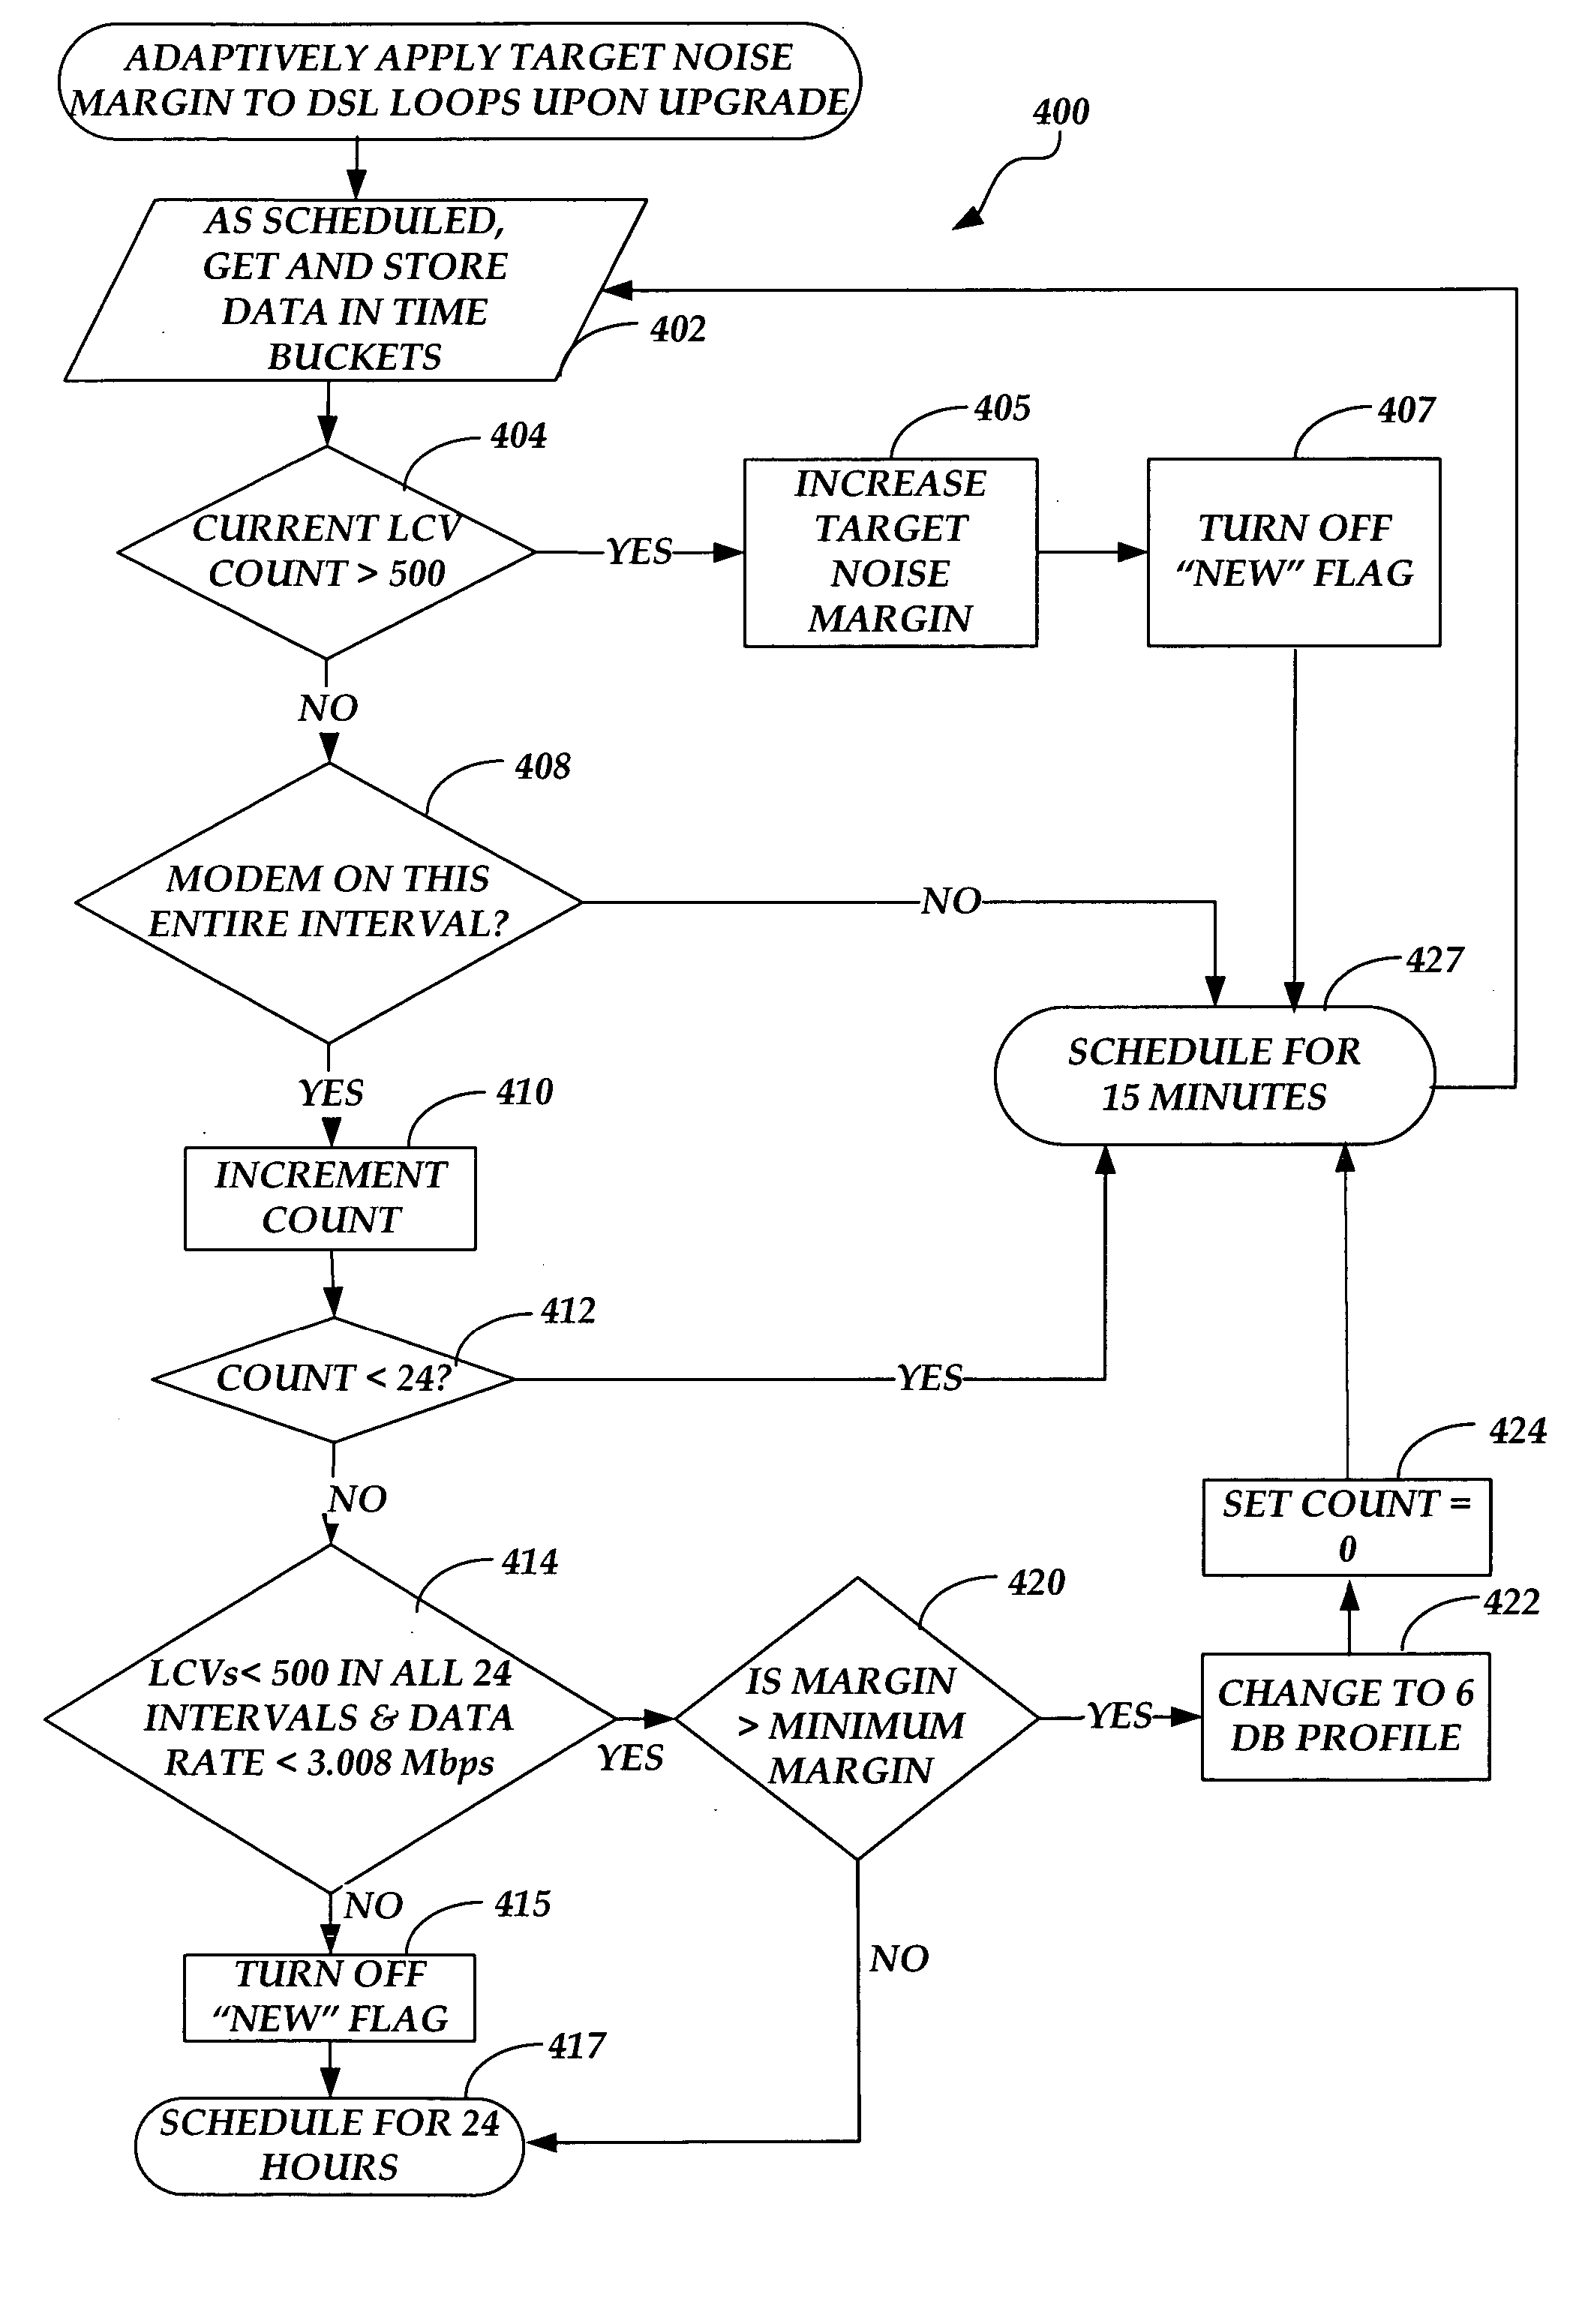 Adaptively applying a target noise margin to a DSL loop for DSL data rate establishment